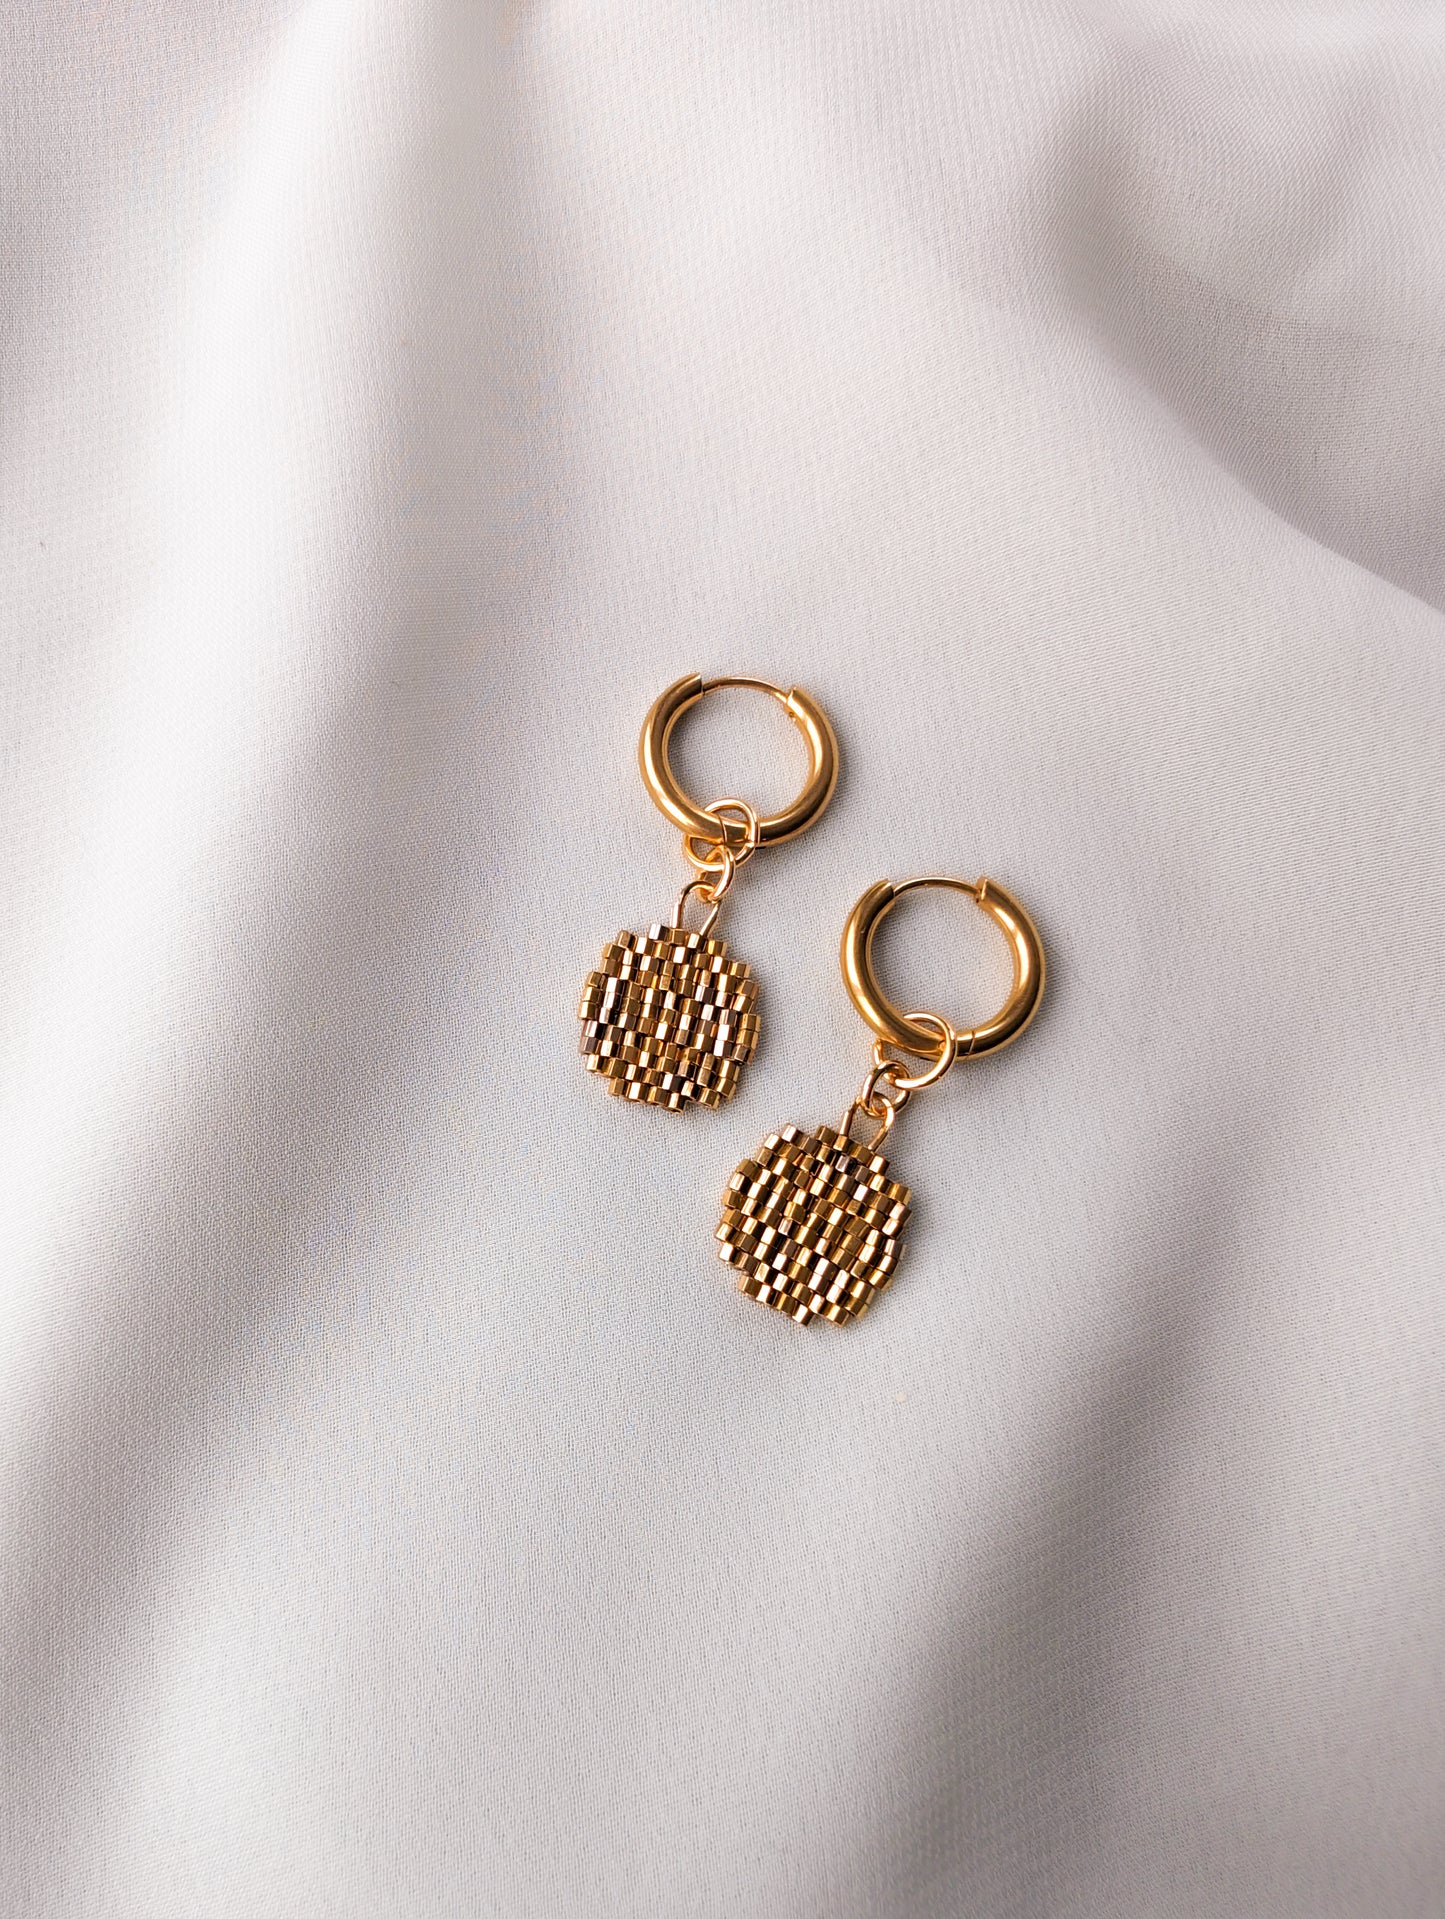 Charms - Liquid Gold Baubles - 24k Gold Plated Hex Cut Beads